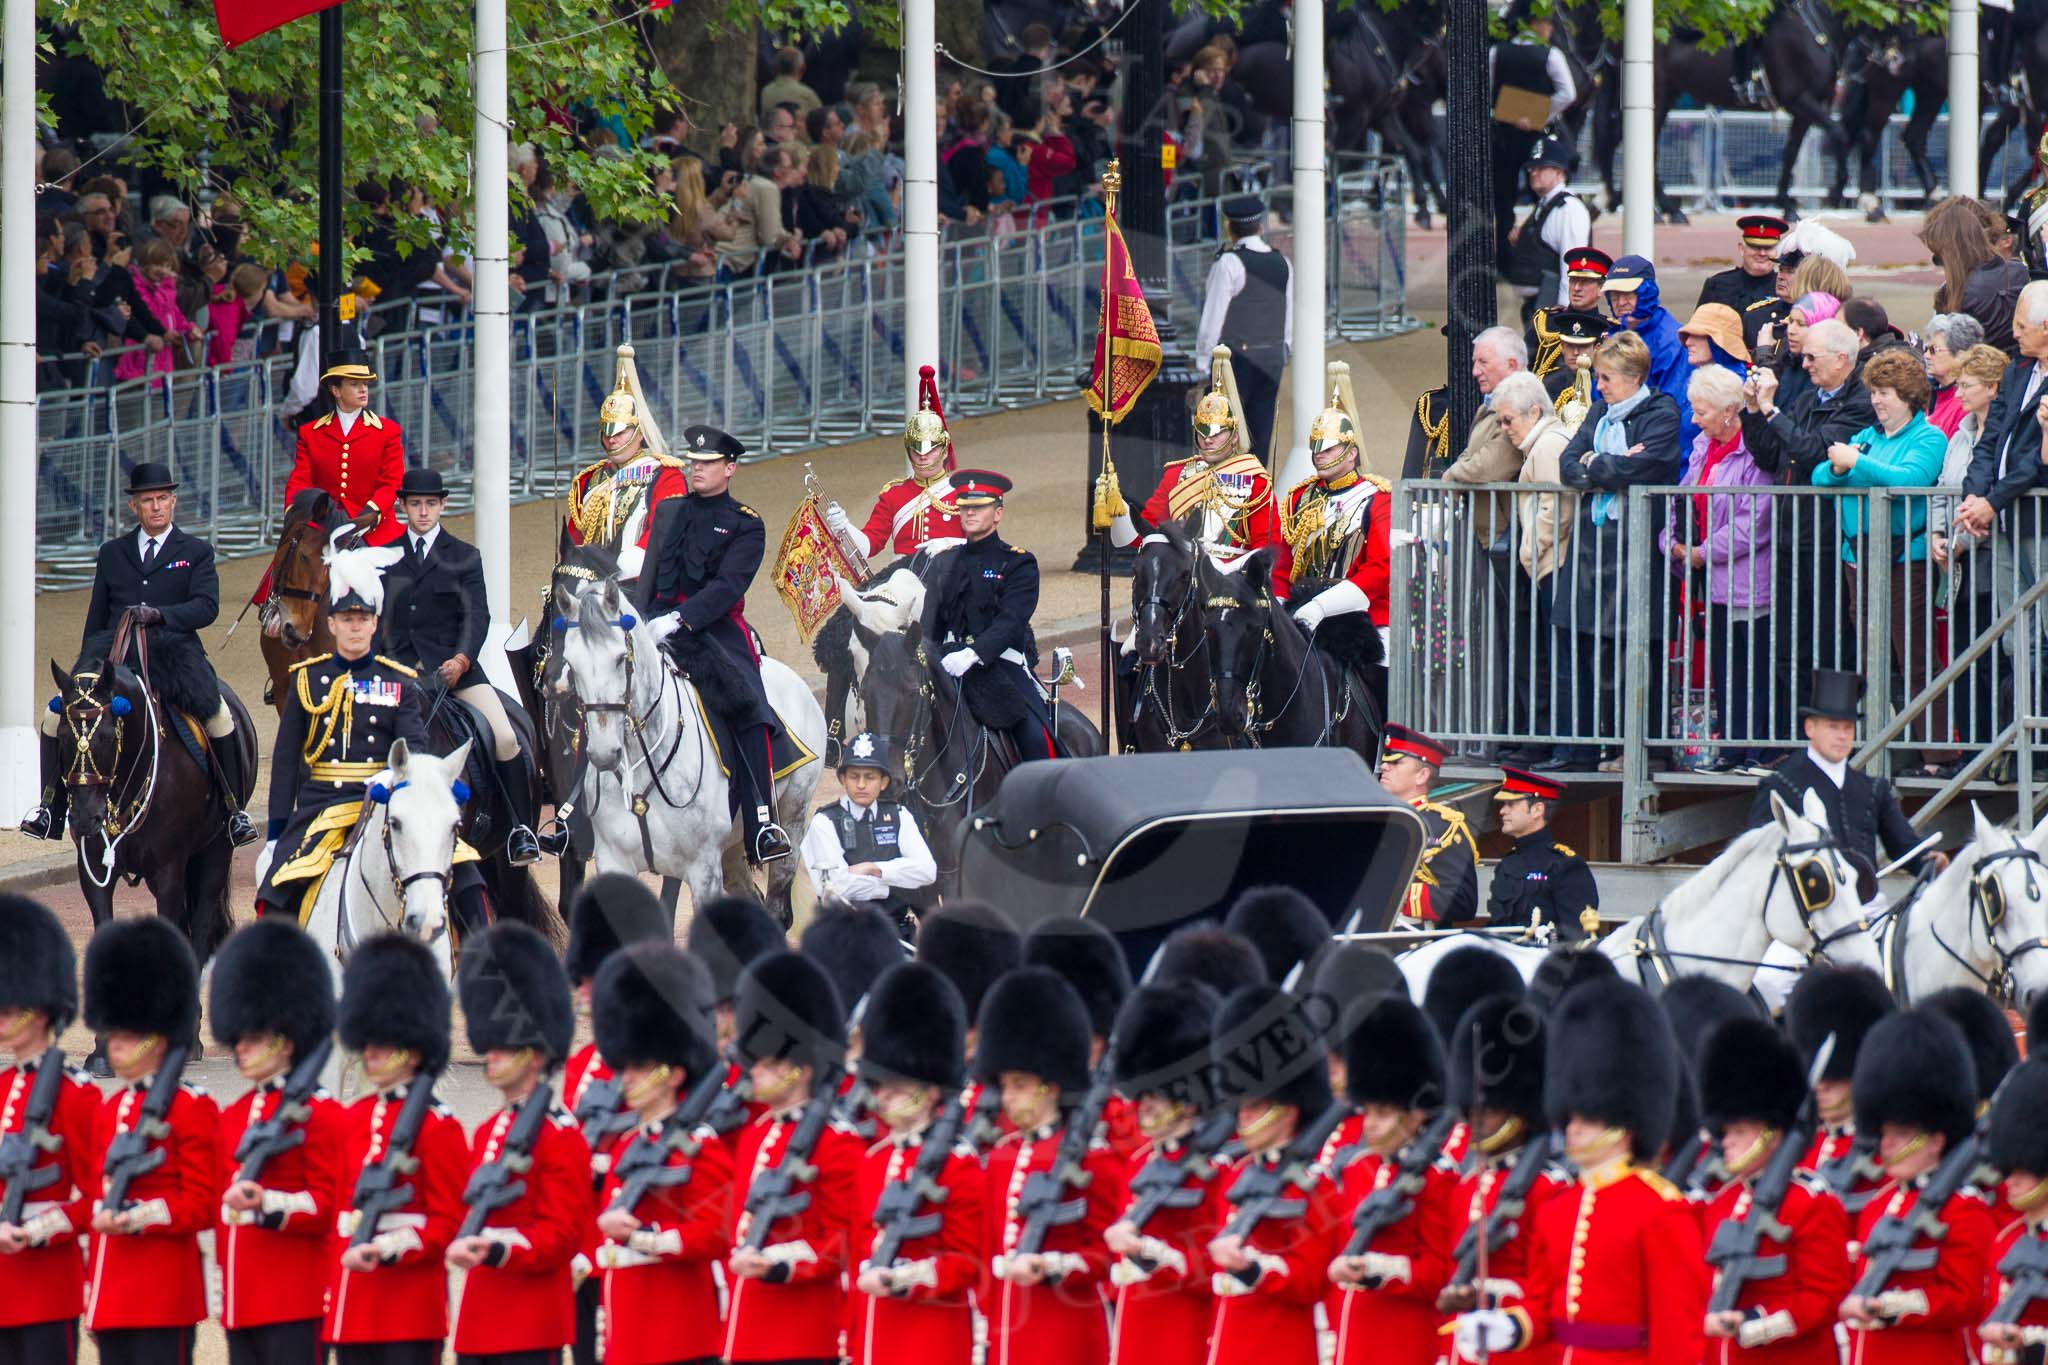 Major General's Review 2013: The Queen's Head Coachman, Mark Hargreaves arrives at Horse Guards Parade..
Horse Guards Parade, Westminster,
London SW1,

United Kingdom,
on 01 June 2013 at 10:58, image #240